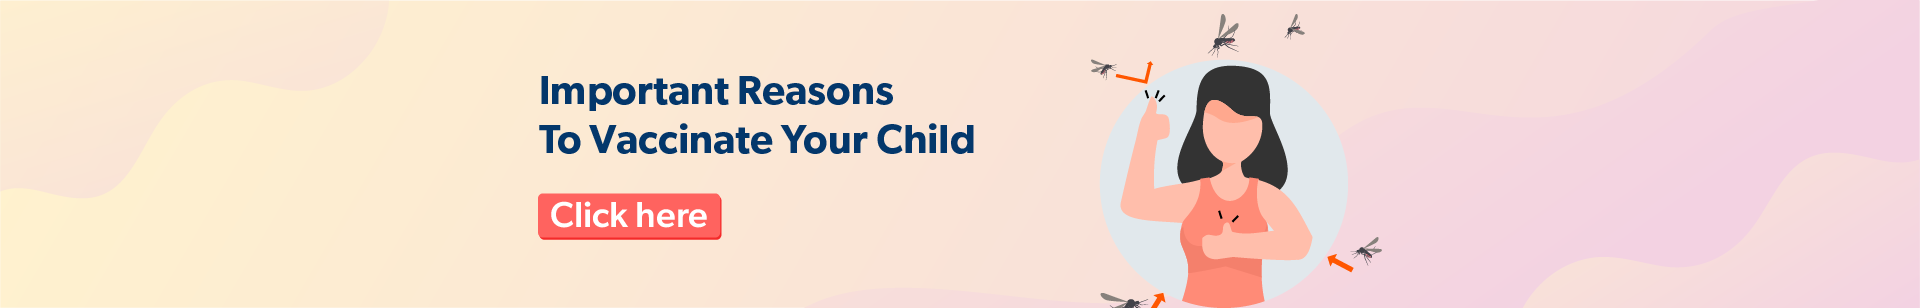 Important Reasons To Vaccinate Your Child